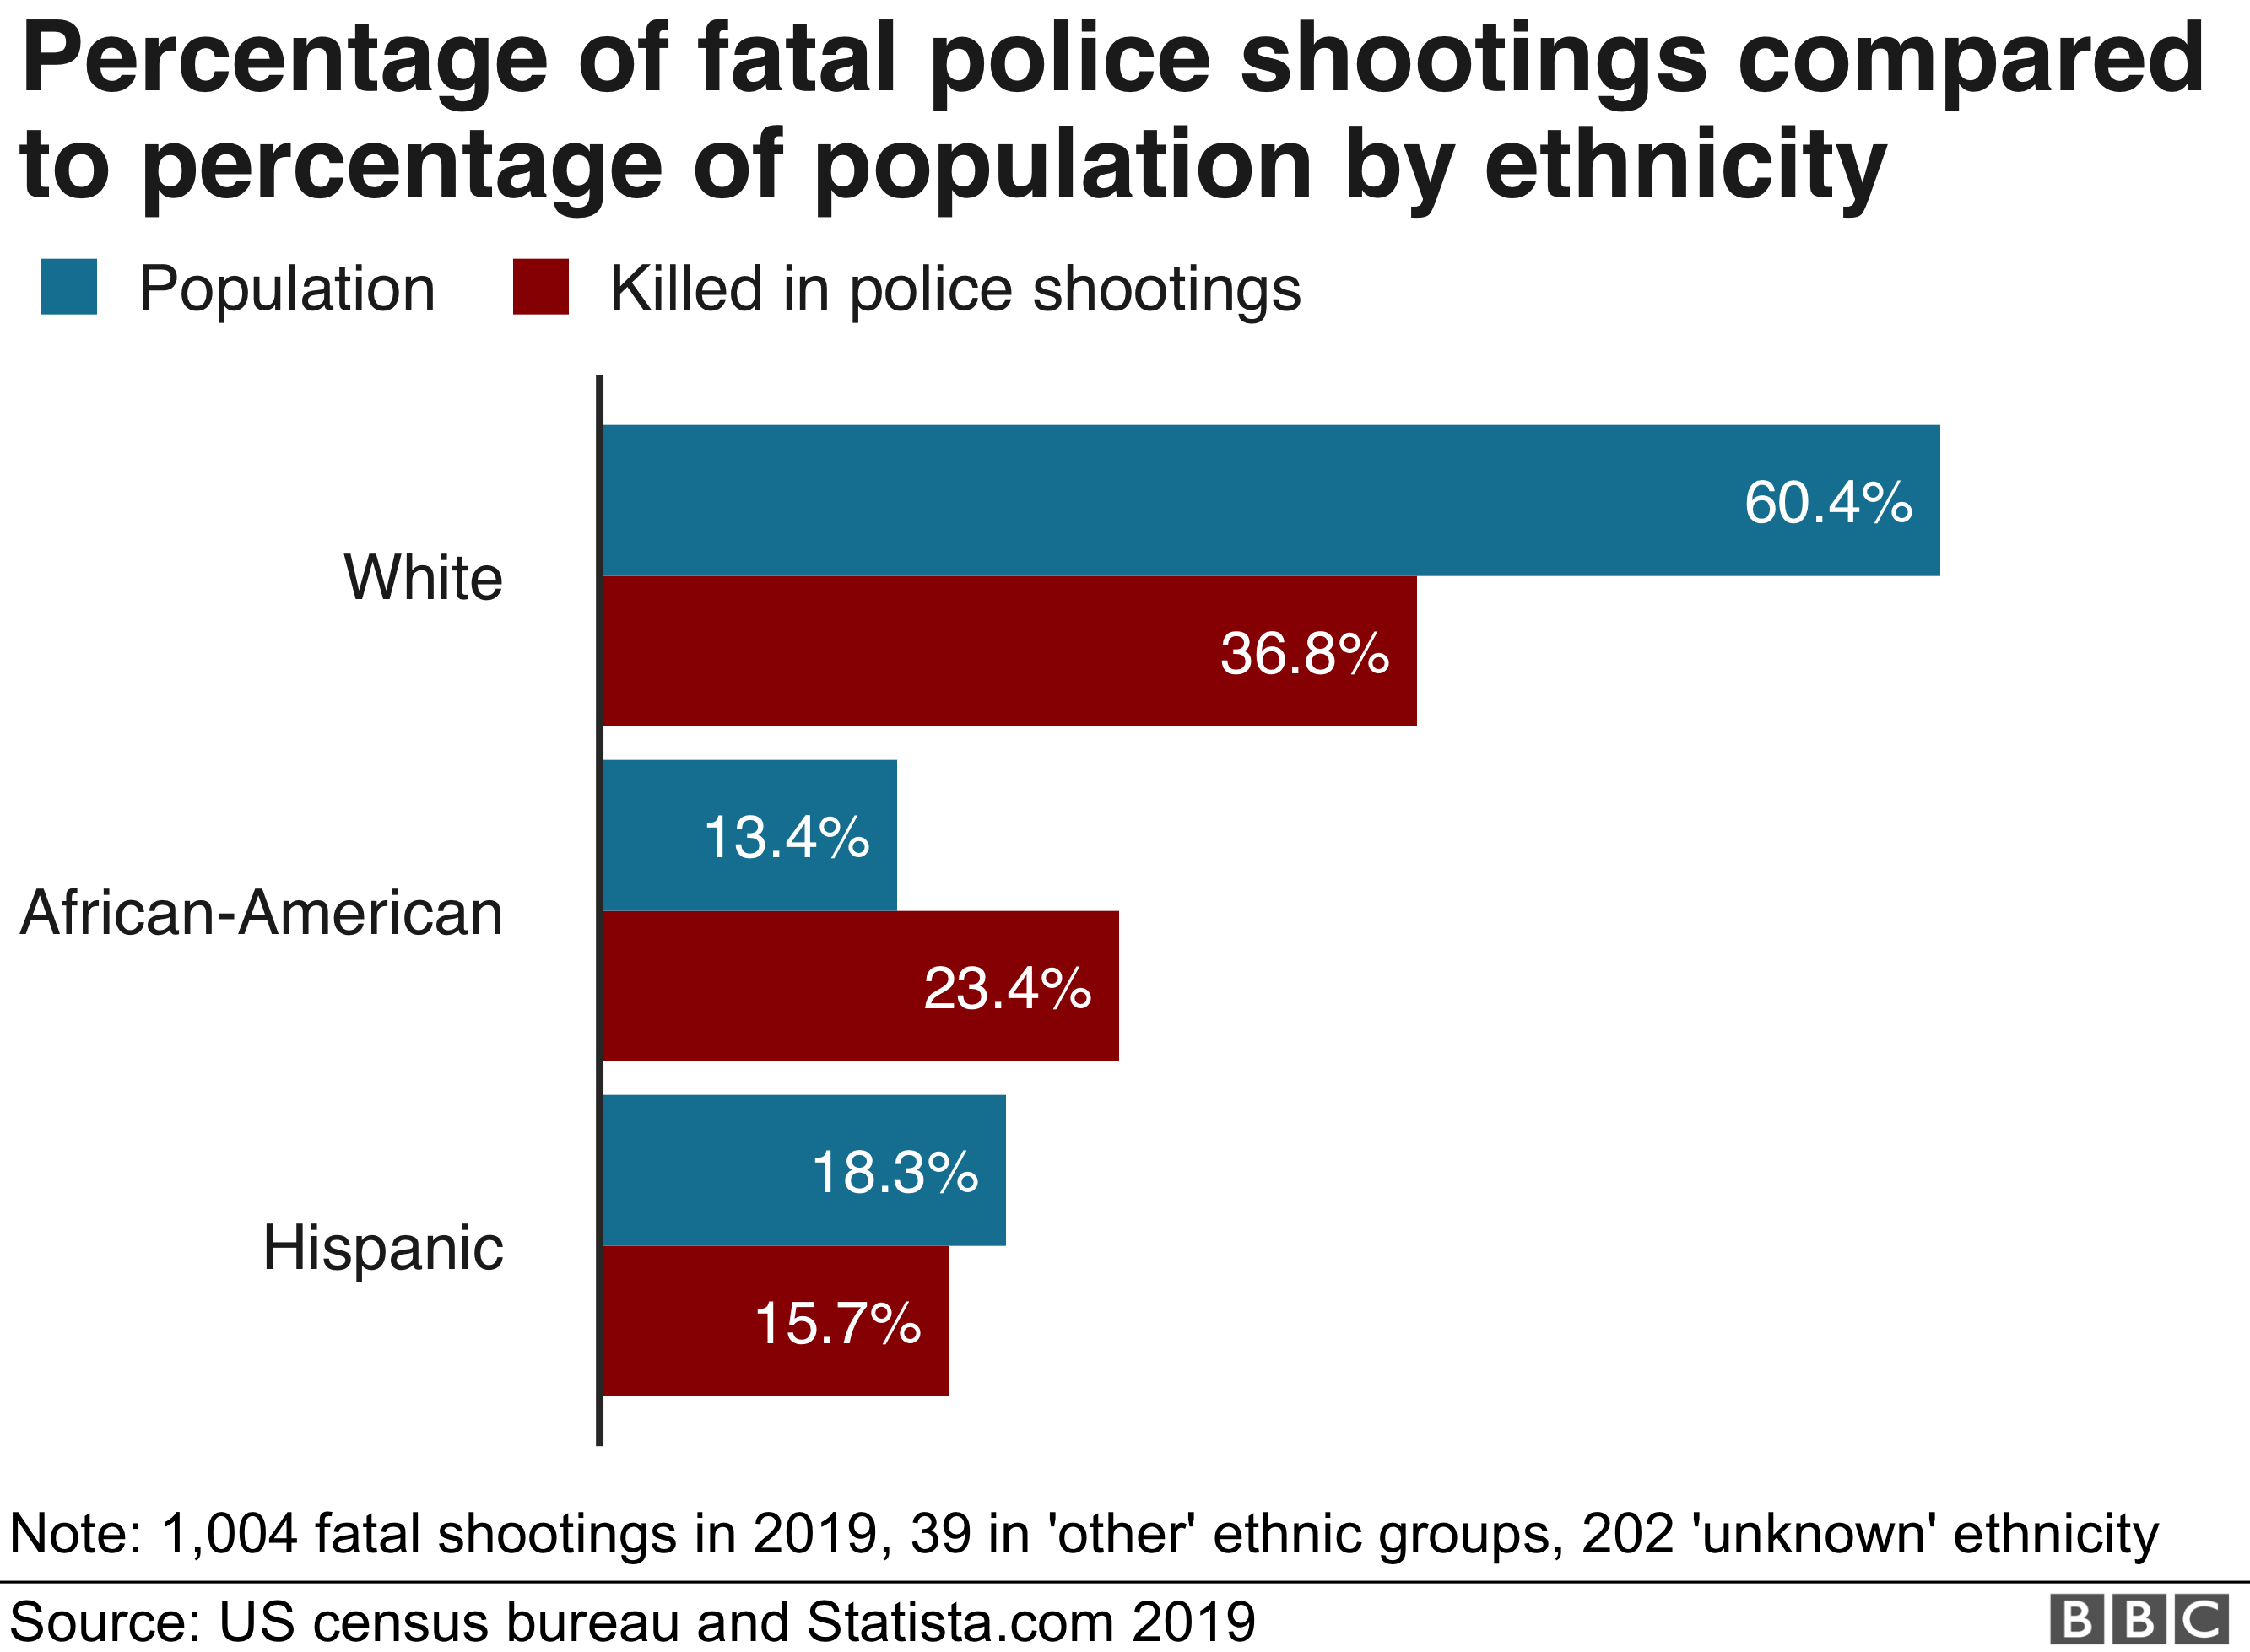 A BBC chart shows the percentage of fatal police shootings compared to the percentage of population by ethnicity